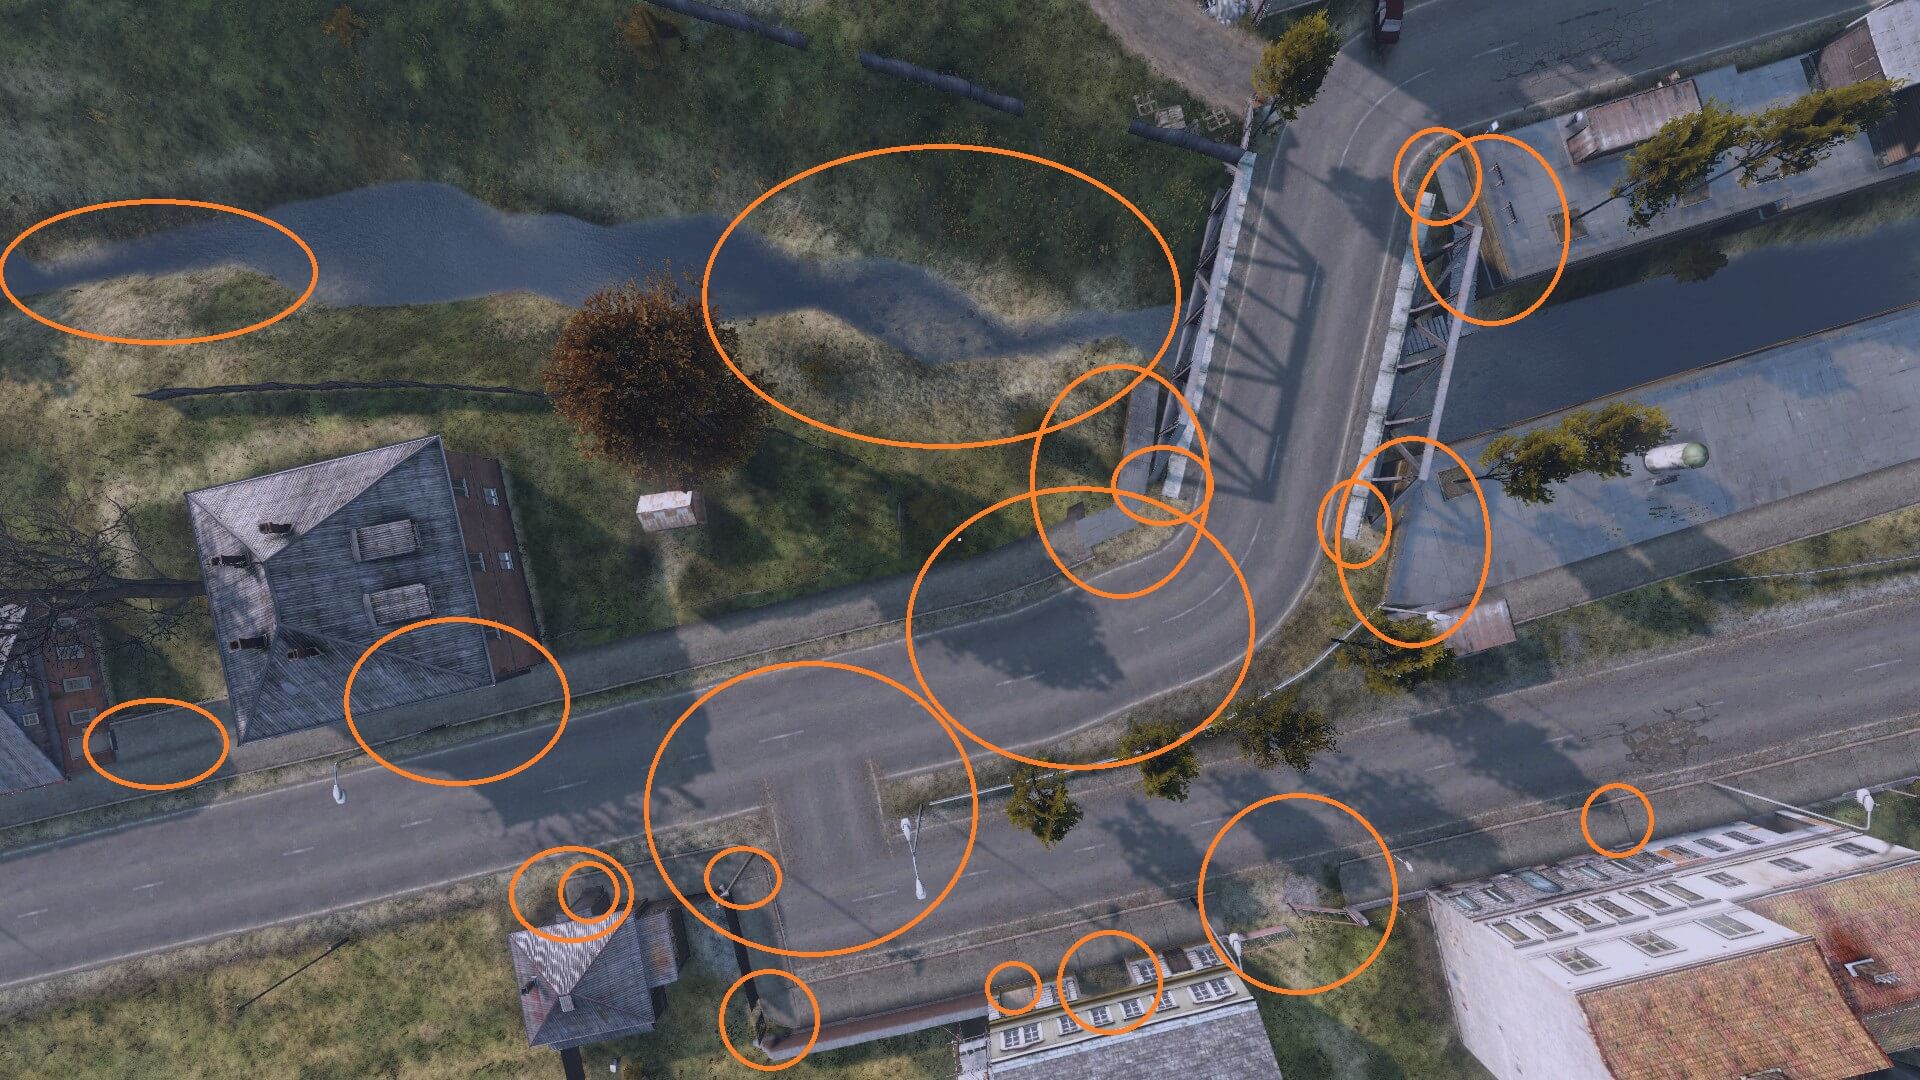 New DayZ player activity map shows where newbies won't survive